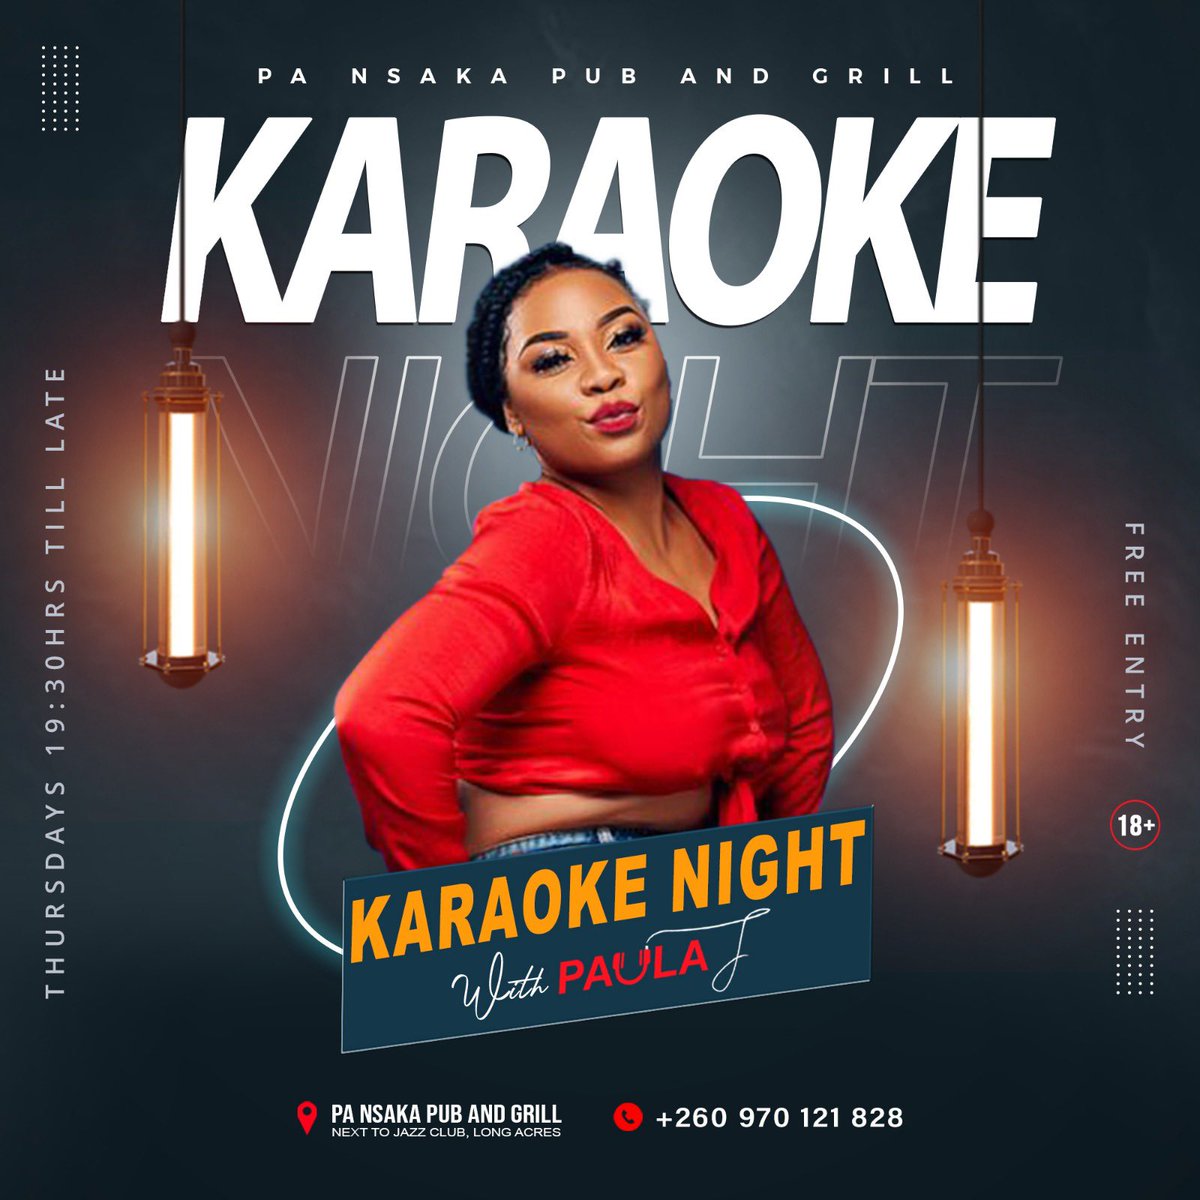 Let’s link up at your favorite karaoke joint in town at Pa Nsaka Pub & Grill opposite Jazz club in Long Acres with your favorite girl PAULA J. Come and have fun and let’s sing the night away together. See you tonight…💃🏽 #KARAOKETHURSDAY #MATUREVYBZONLY #PANSAKA